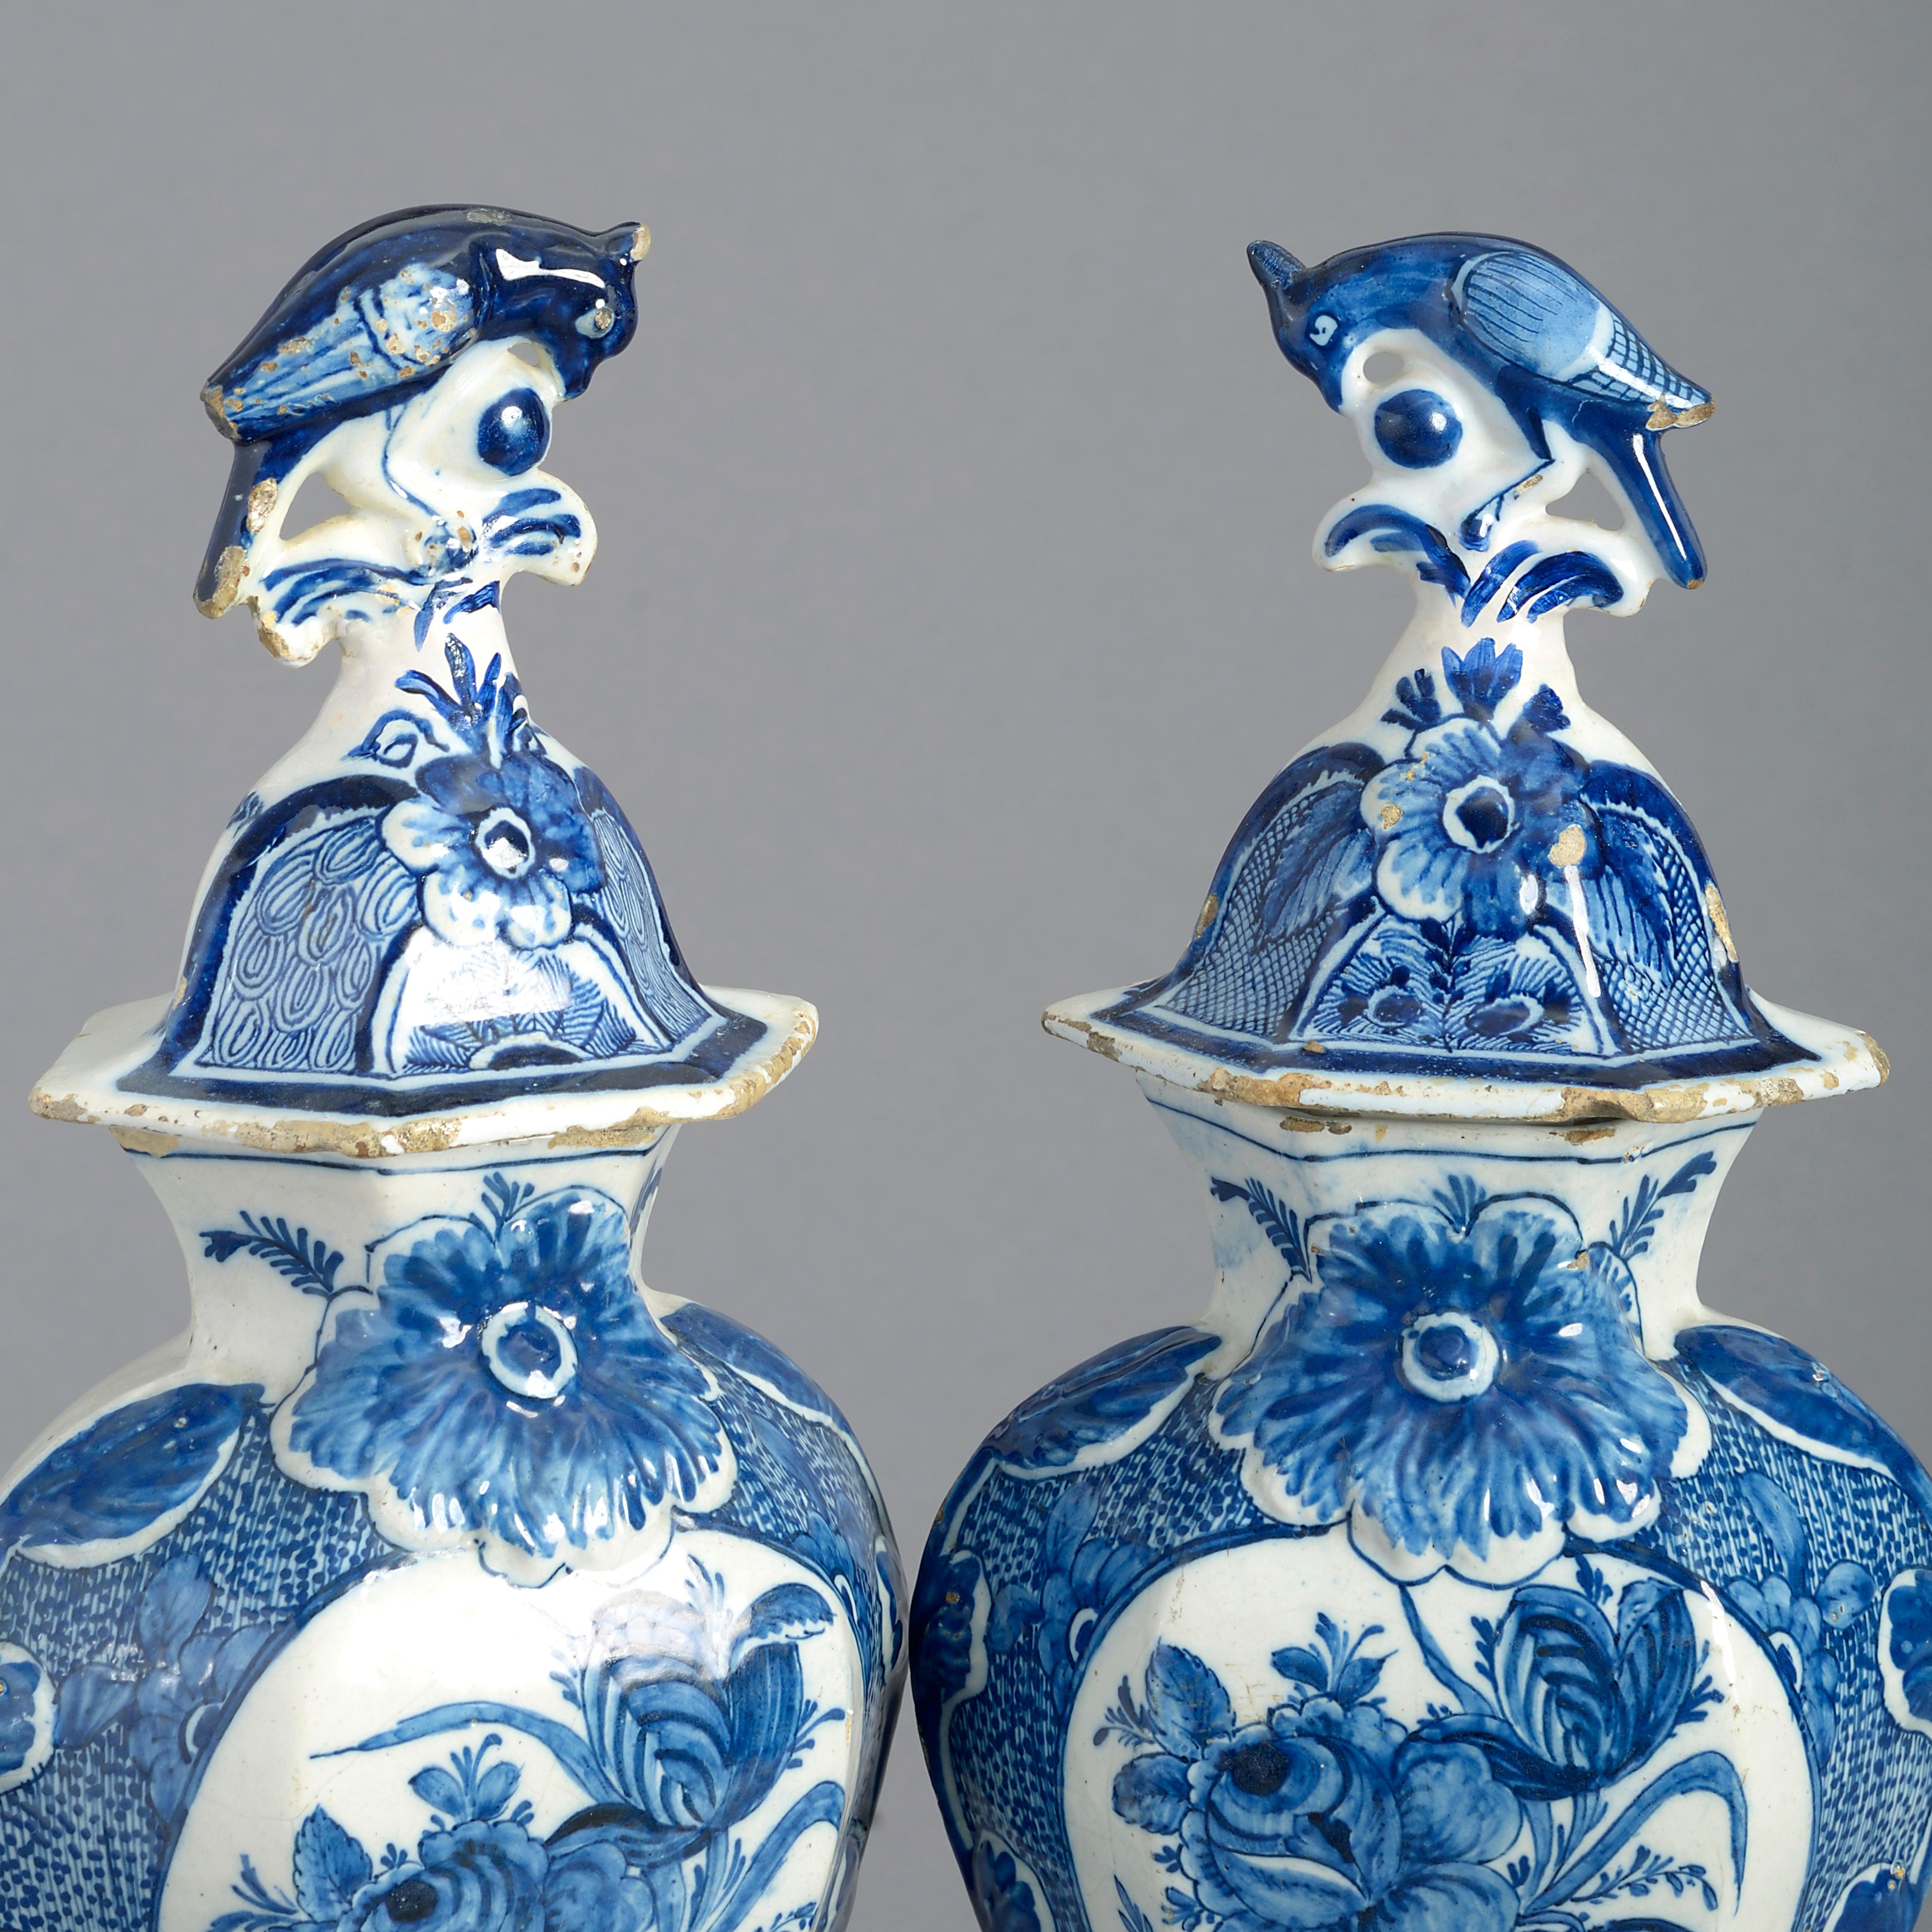 A good pair of late 18th century blue and white glazed delft pottery vases and covers, the lids with parrot finials, the shaped bodies having floral cartouches.